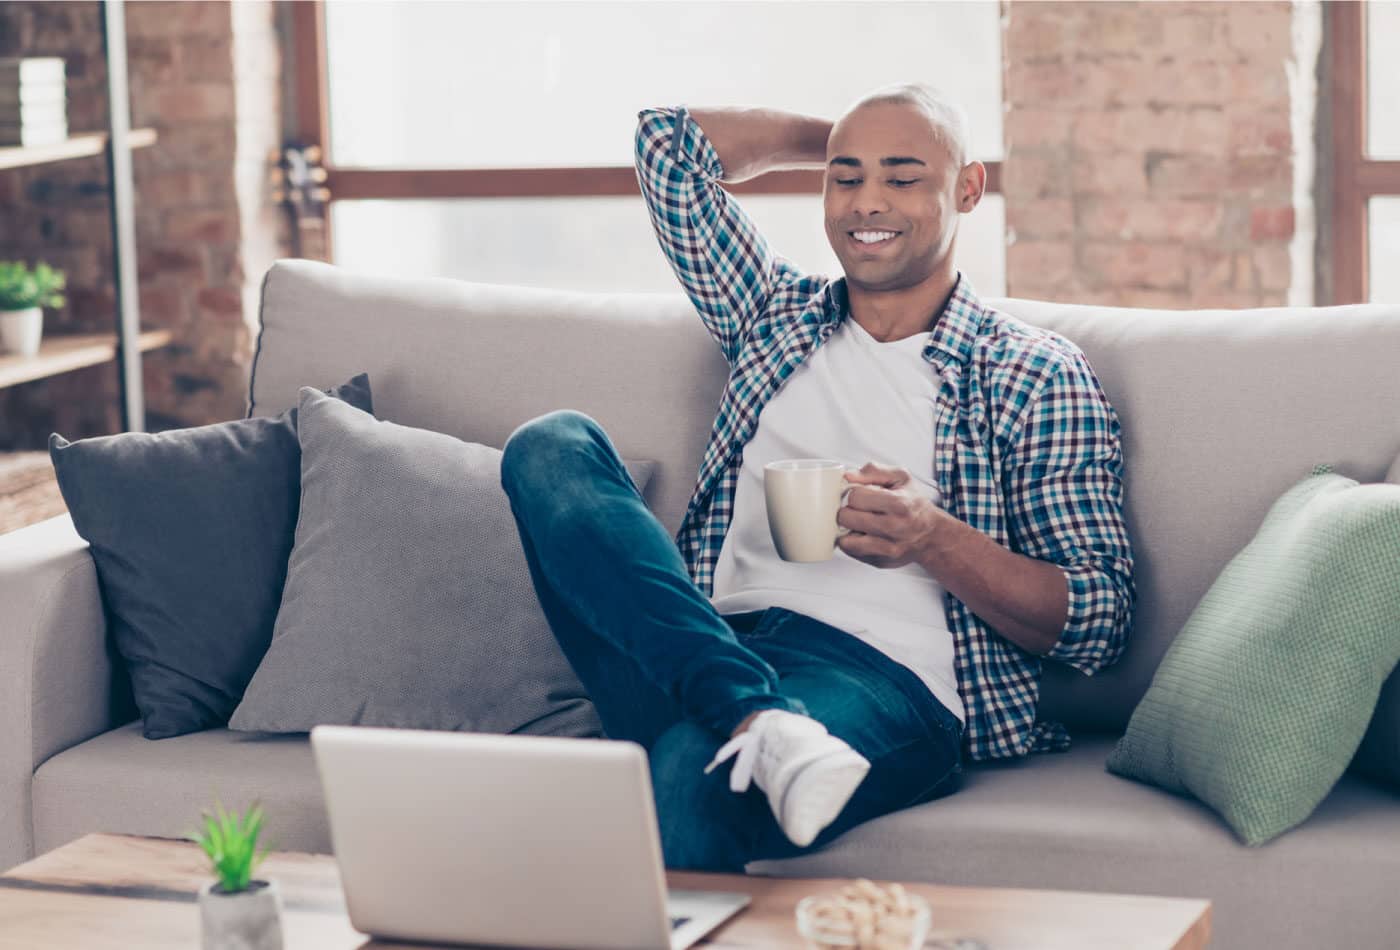 Man sitting on a couch in front of a laptop with his legs crossed while holding a coffee mug